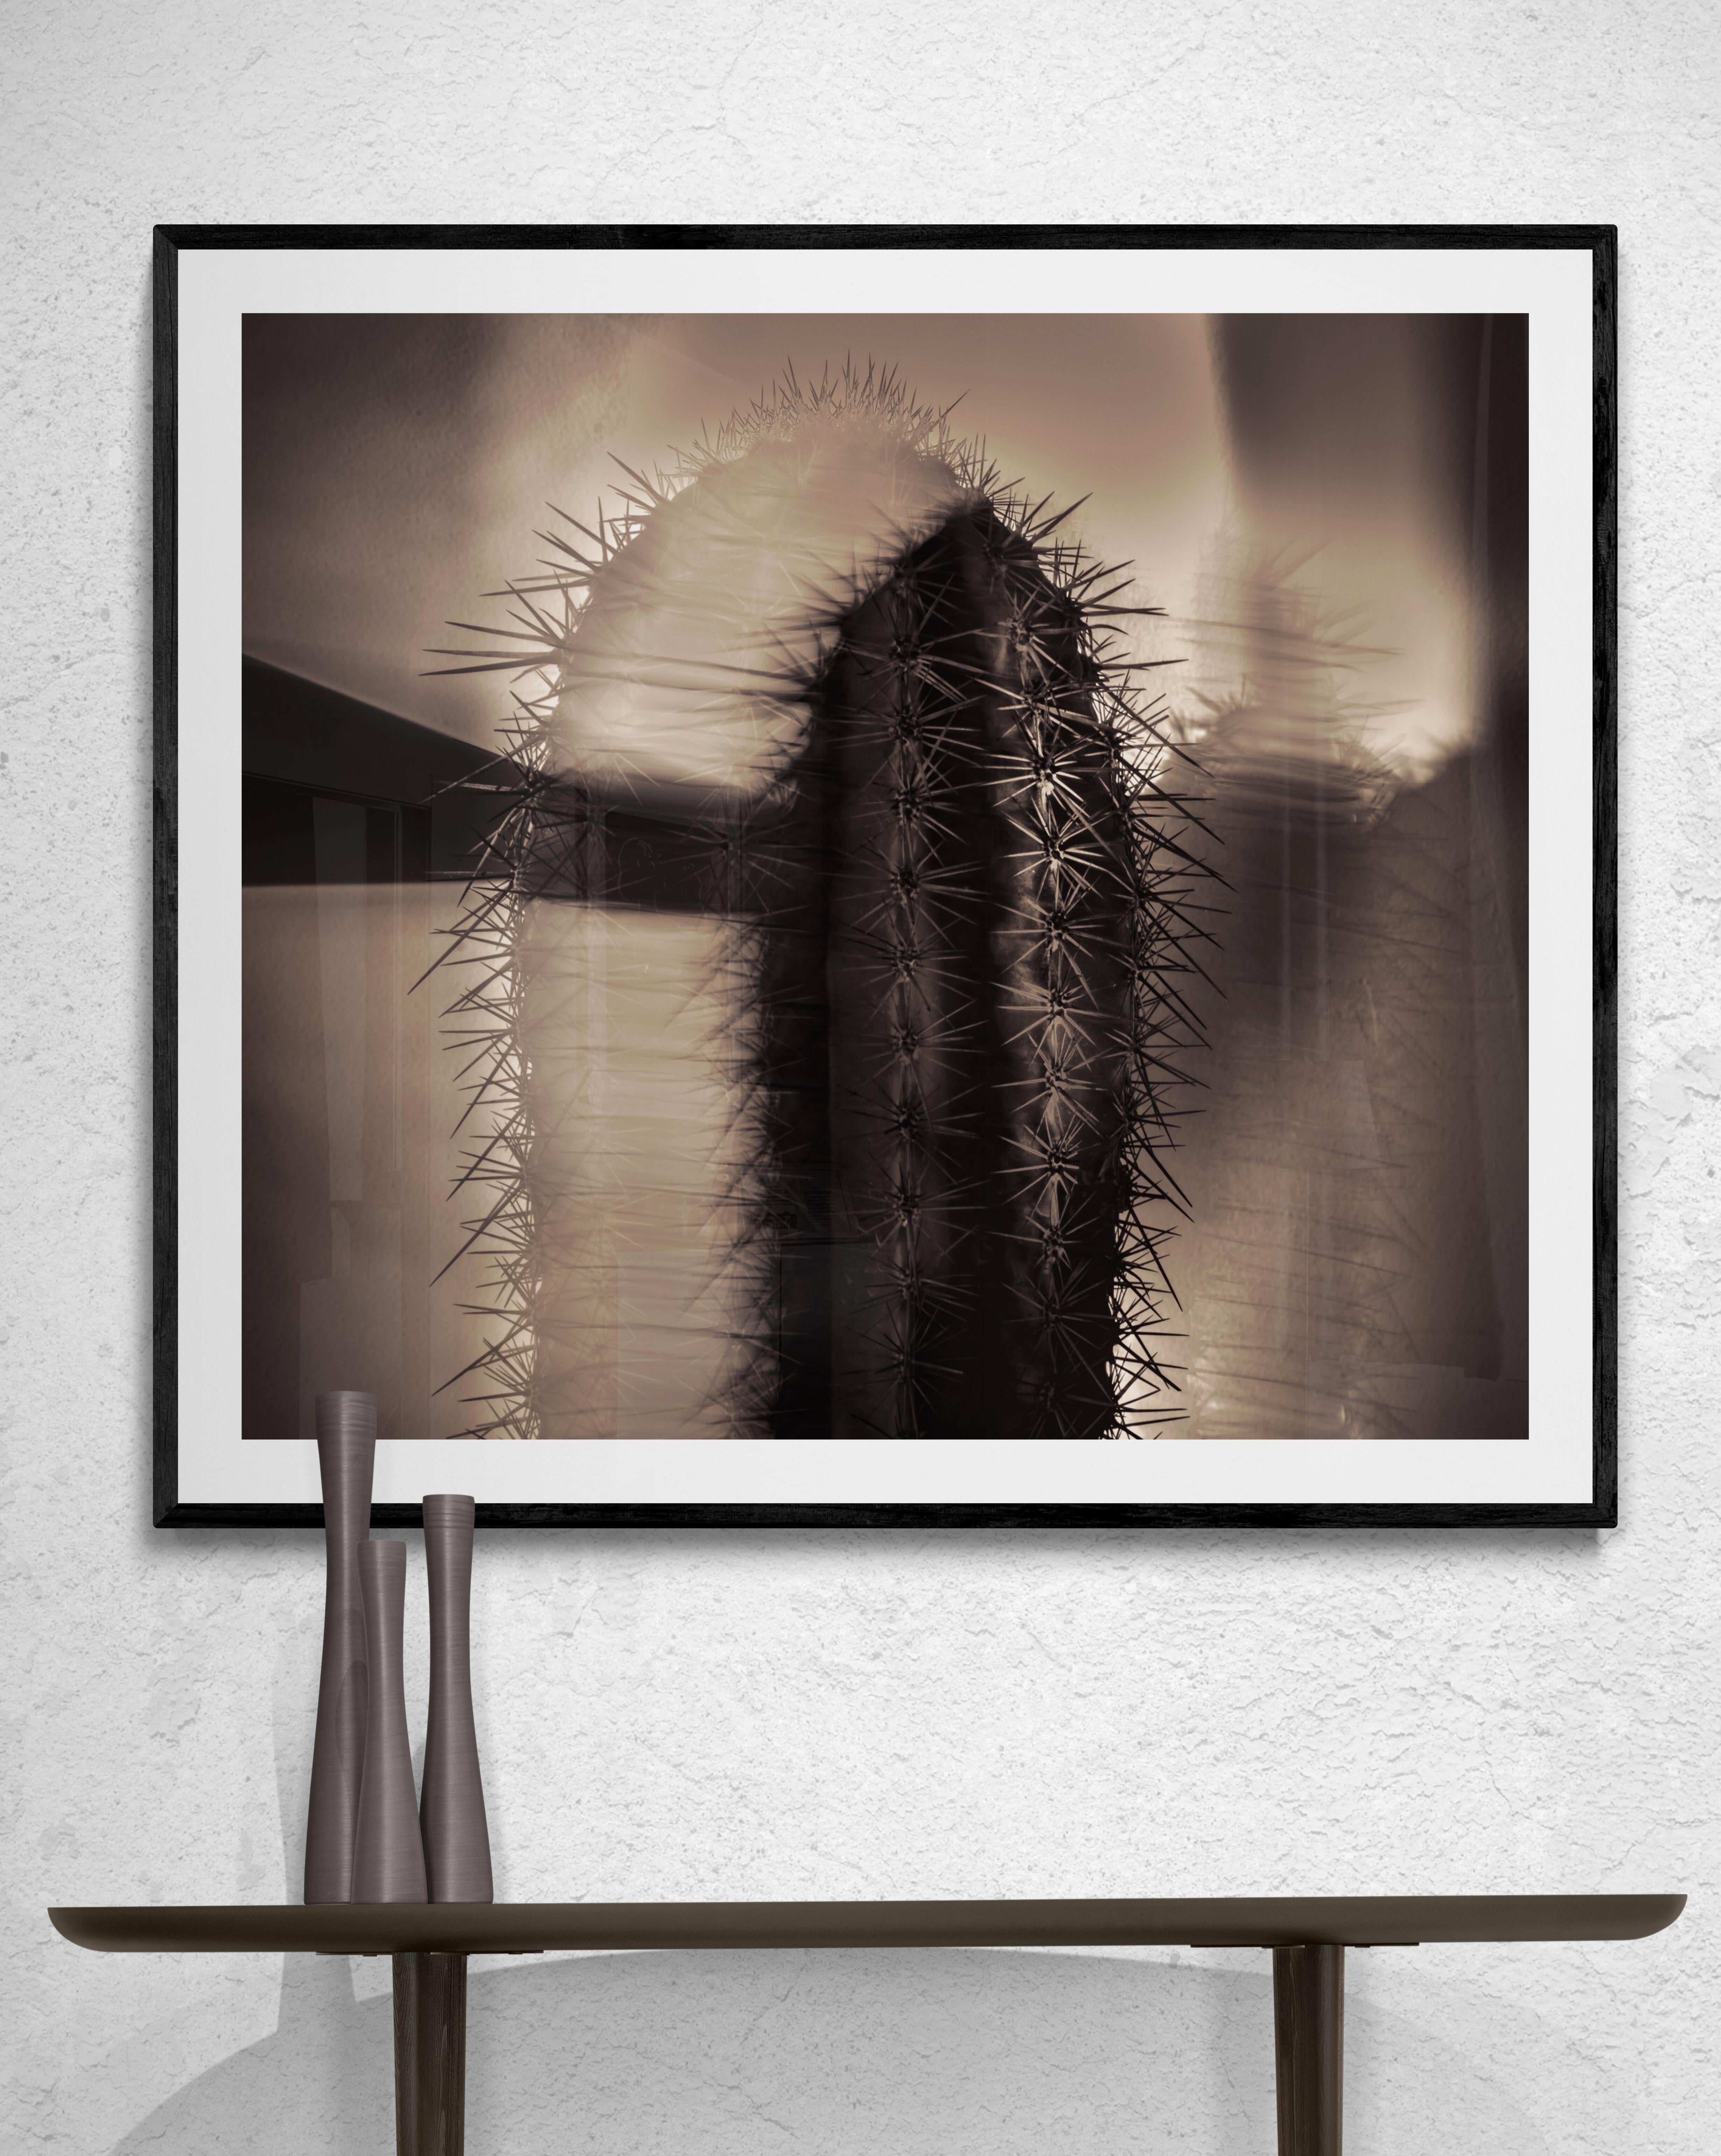  Limited Edition Color Photograph - Still Life, Desert Botanical 2016. This image is called Thorny Affair. The photographer was influenced by several trips through the American desert. These images depart from his usual subject matter and often